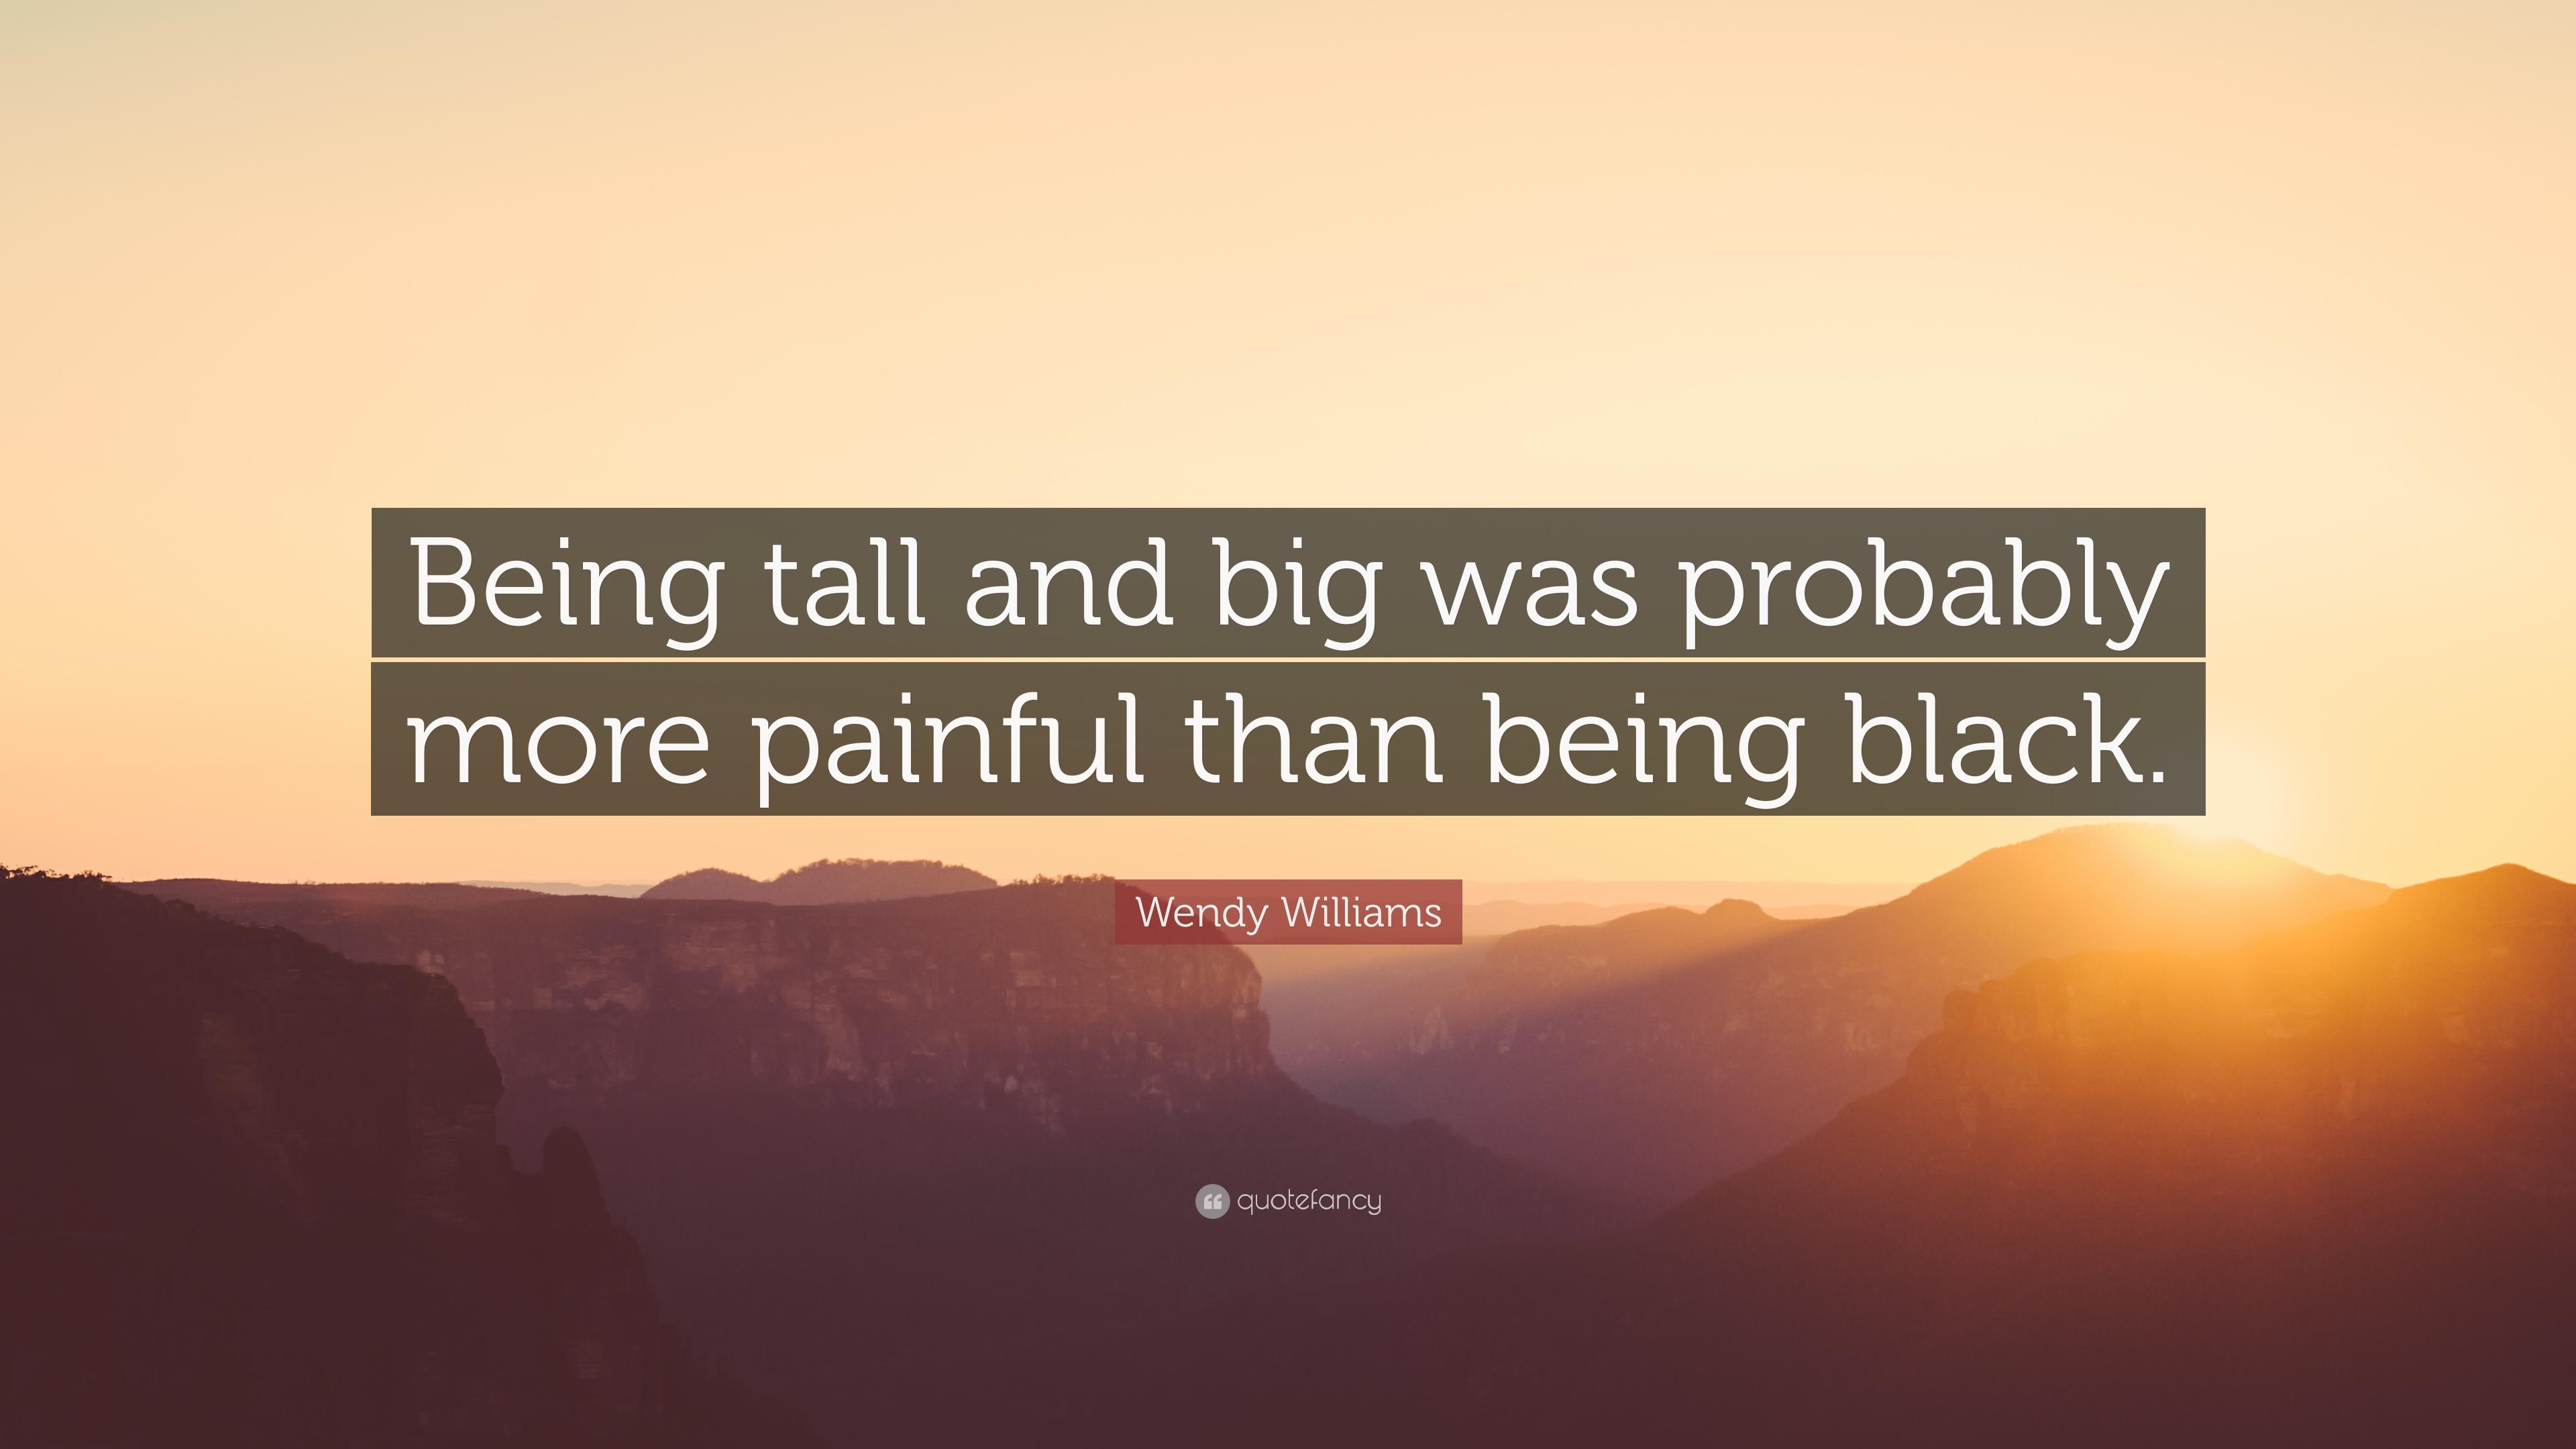 Wendy Williams Quote: “Being tall and big was probably more painful